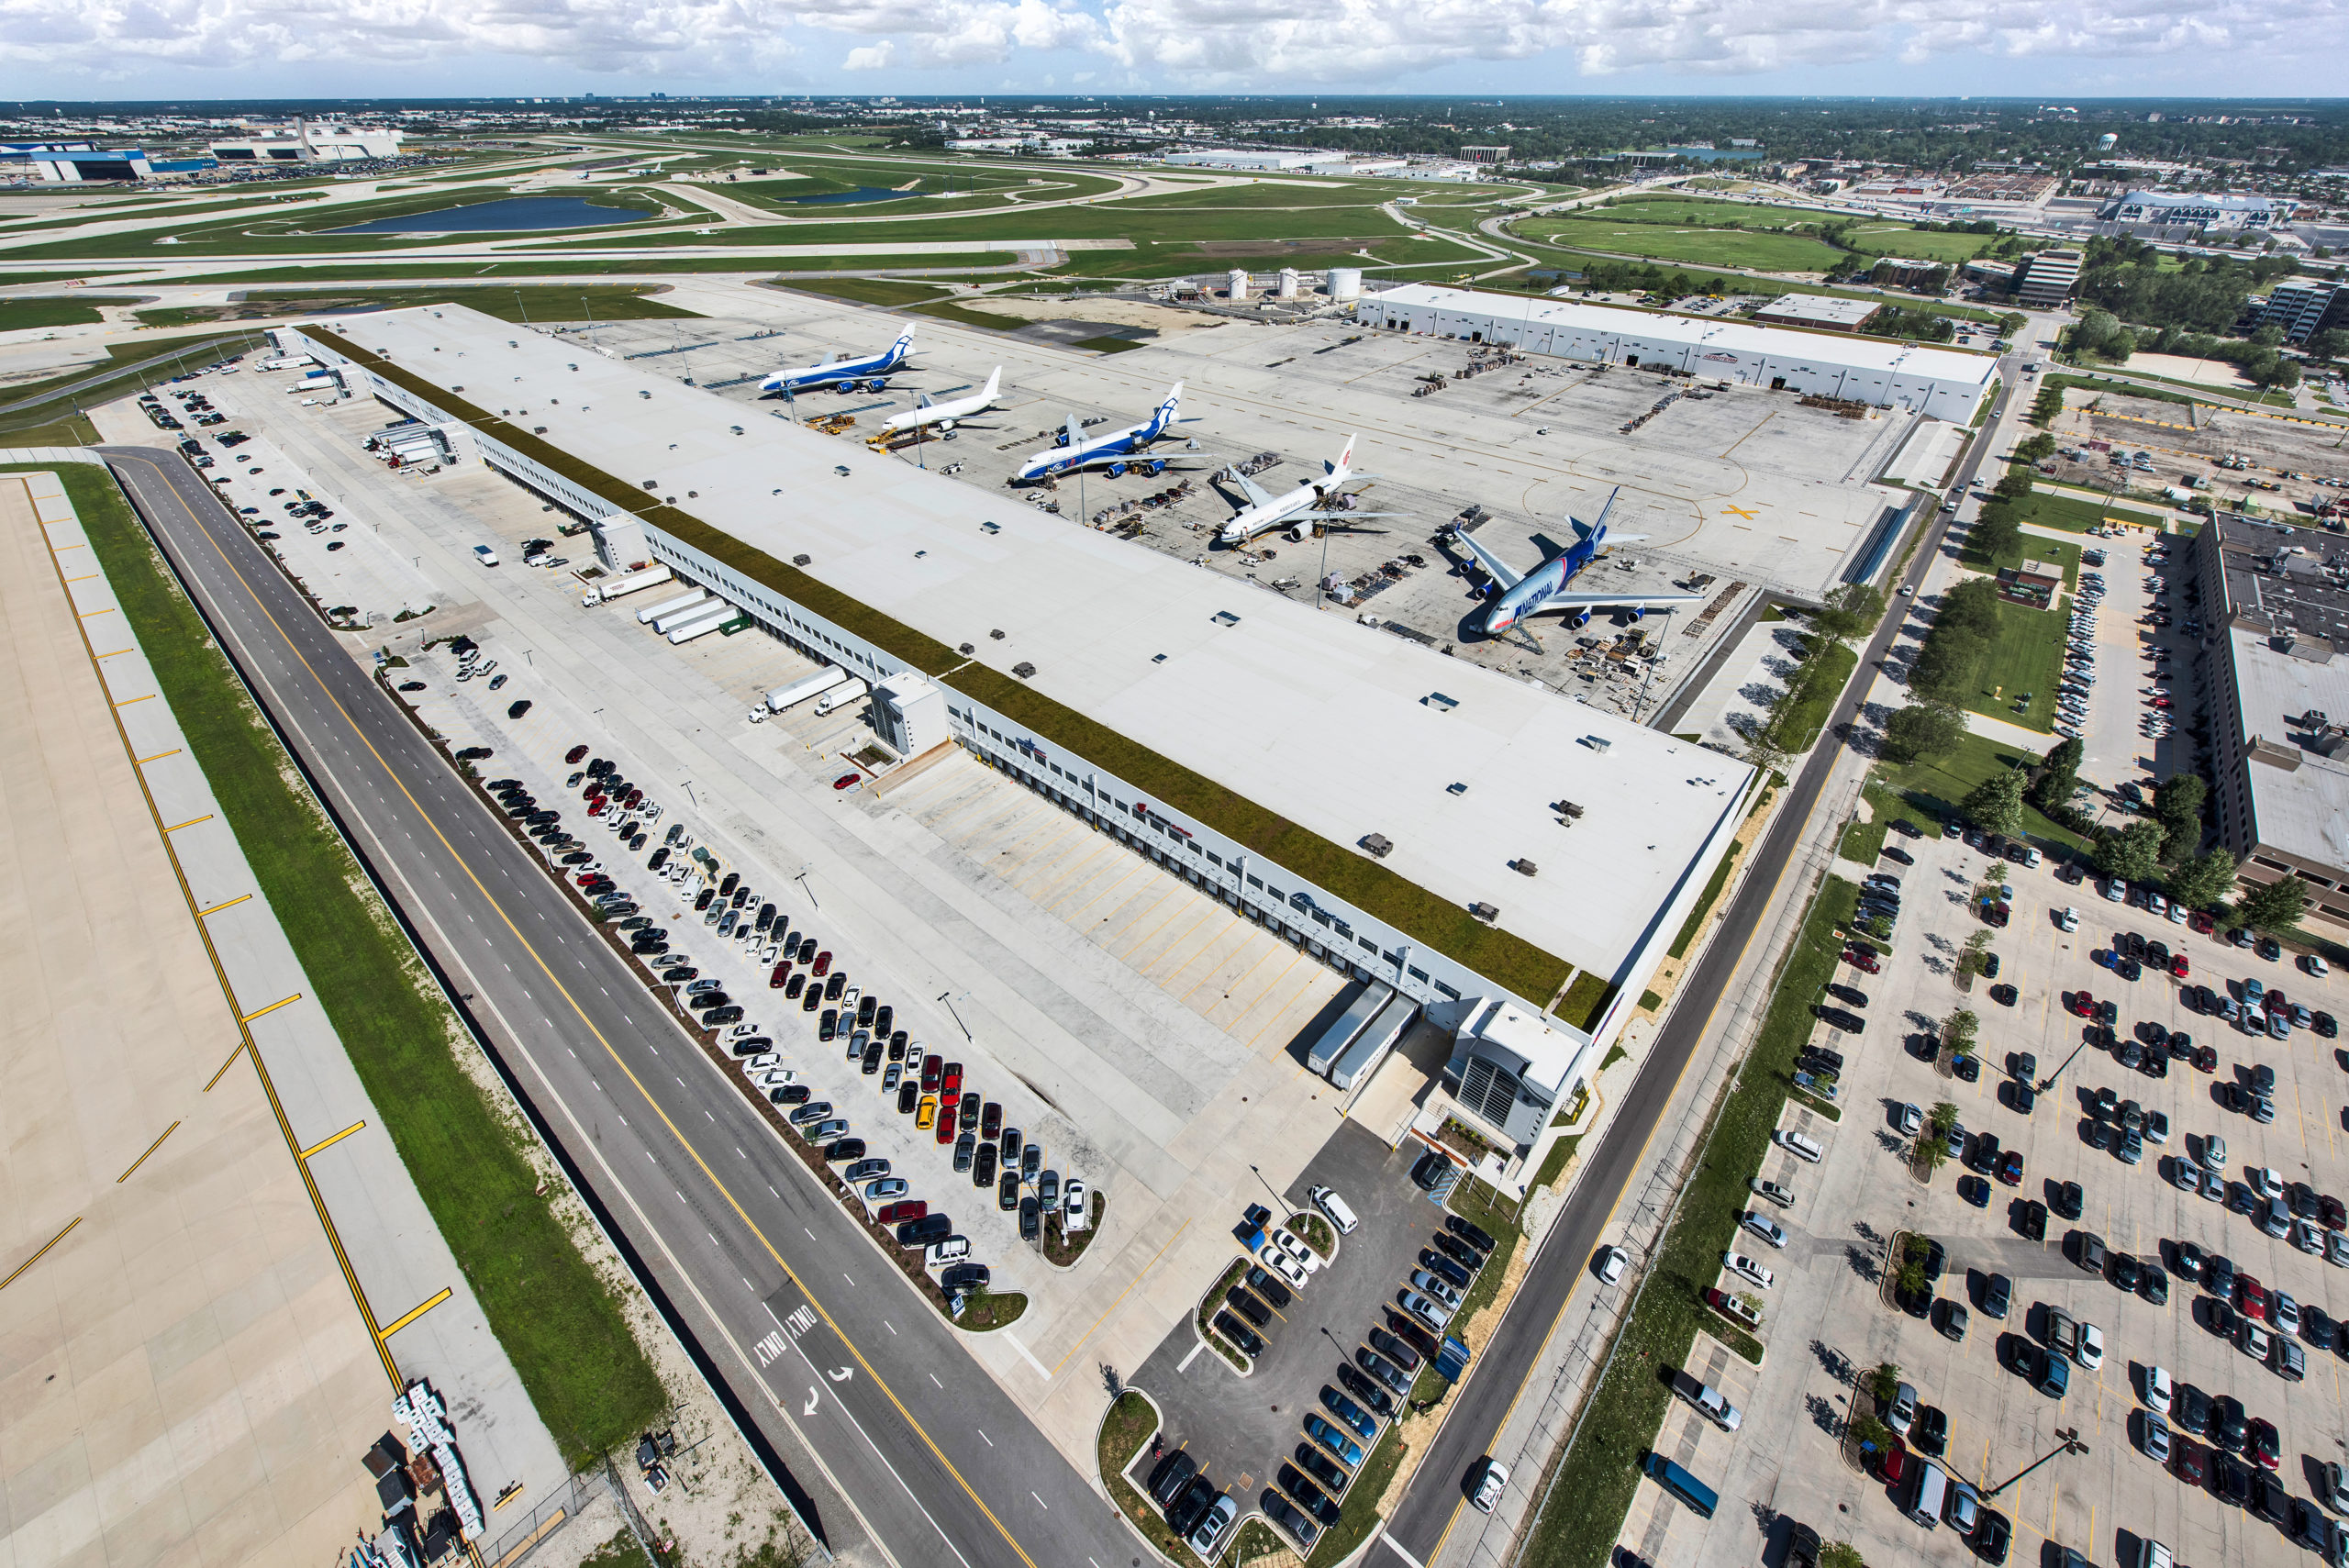 Chicago O'Hare Airport's (ORD) Northeast cargo facility, developed by Aeroterm. Photo/Aeroterm